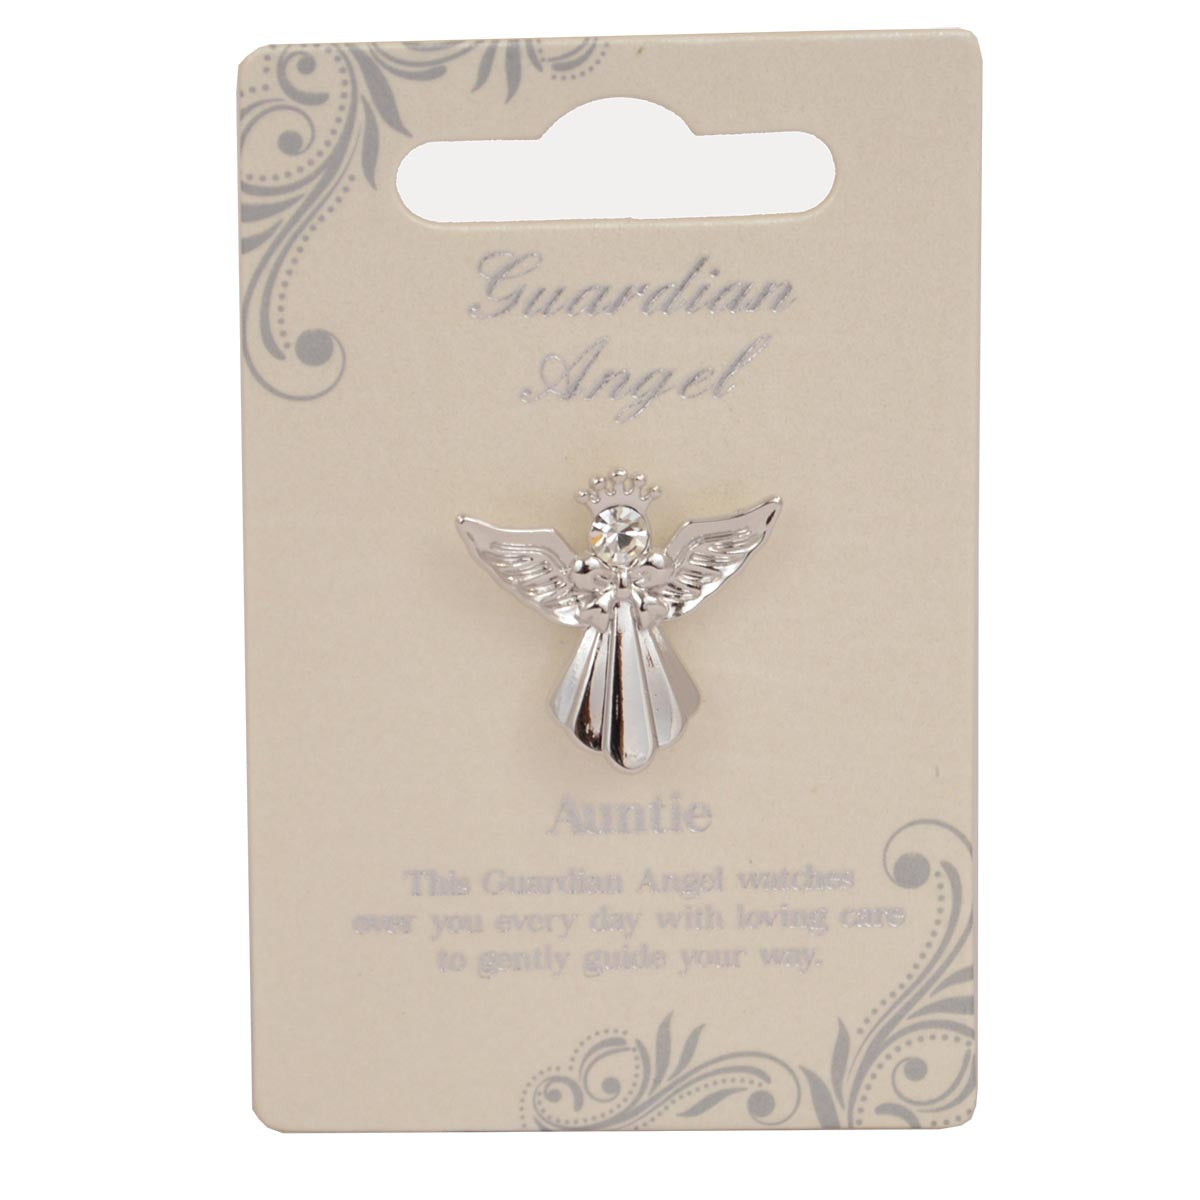 Auntie Guardian Angel Silver Coloured Angel Pin With Gem Stone